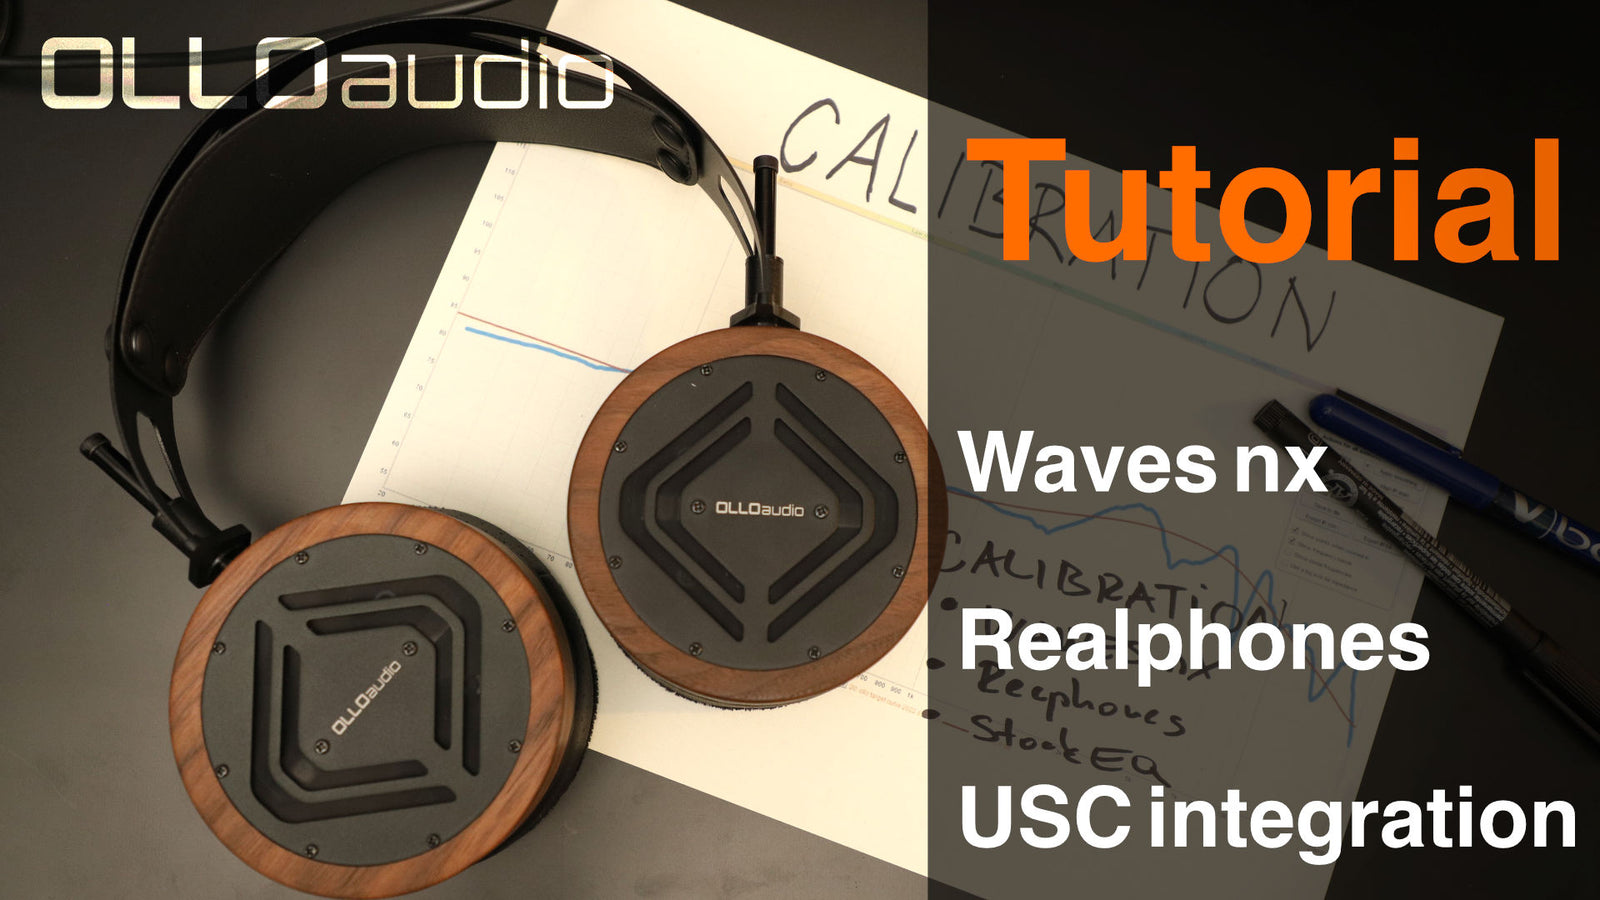 EP34 - Waves nX and Realphones with the USC calibration